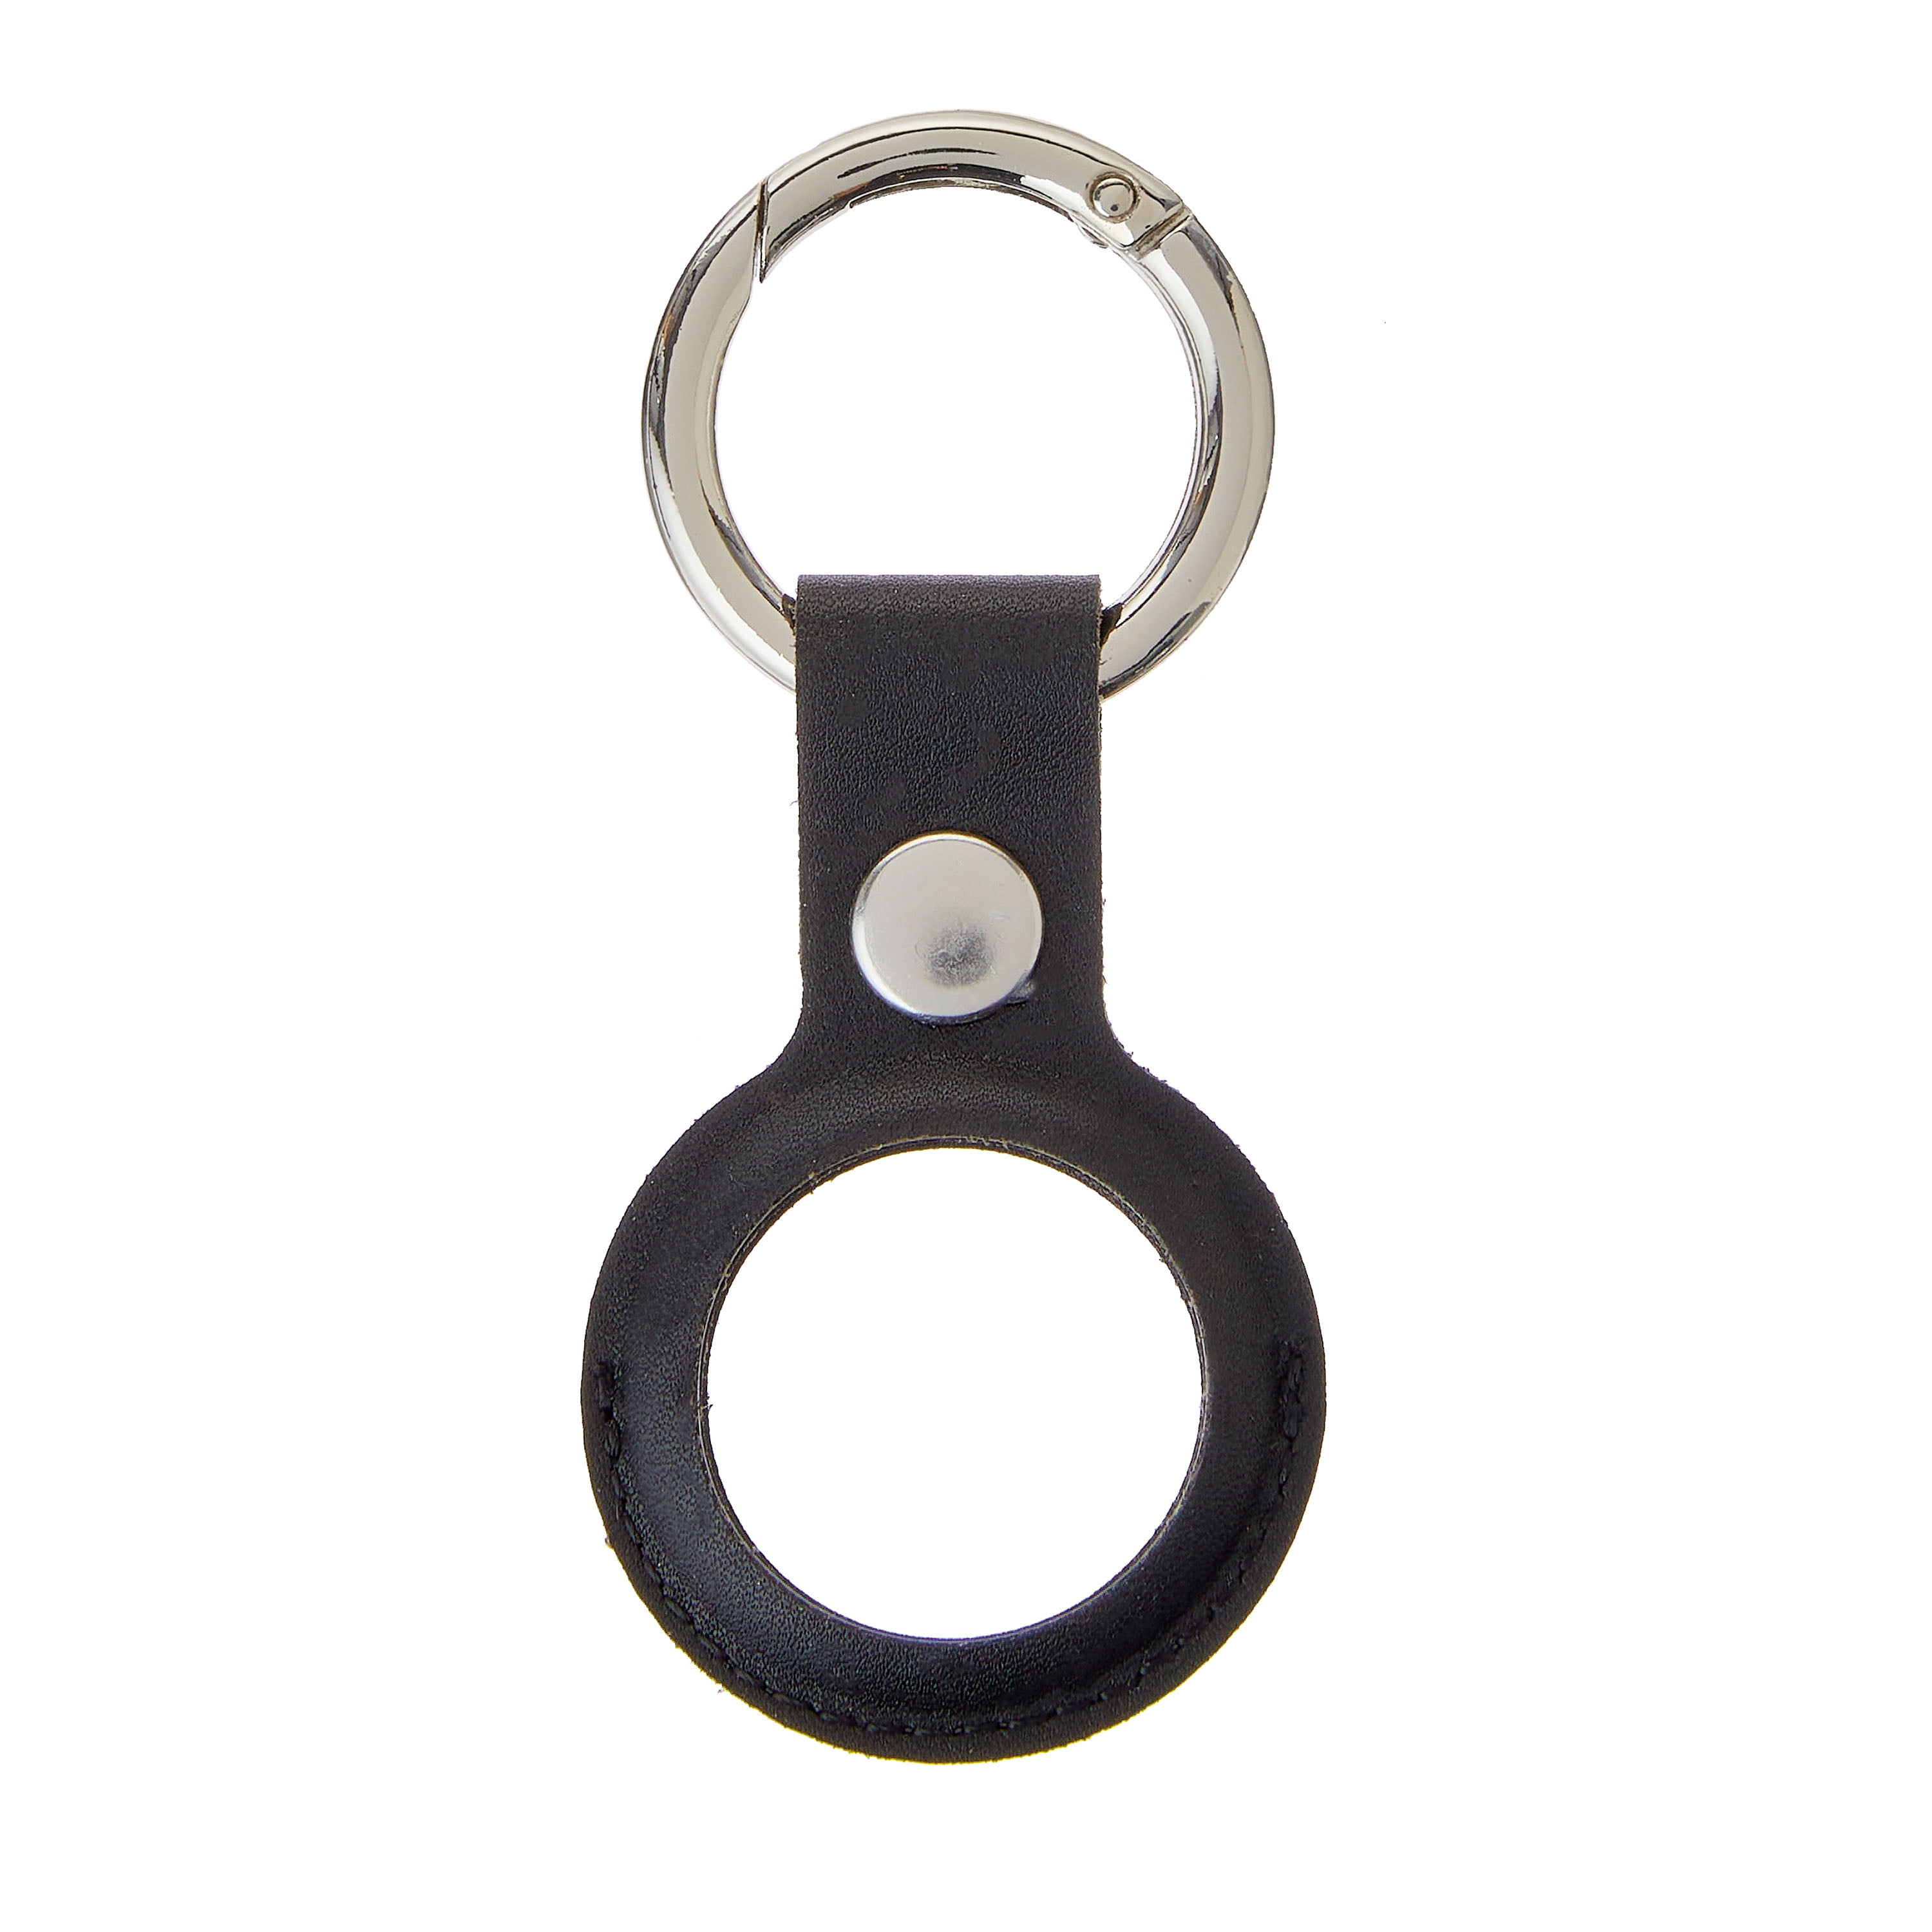 onn. AirTag Holder with Carabiner-Style Ring, Vegan Leather, Black